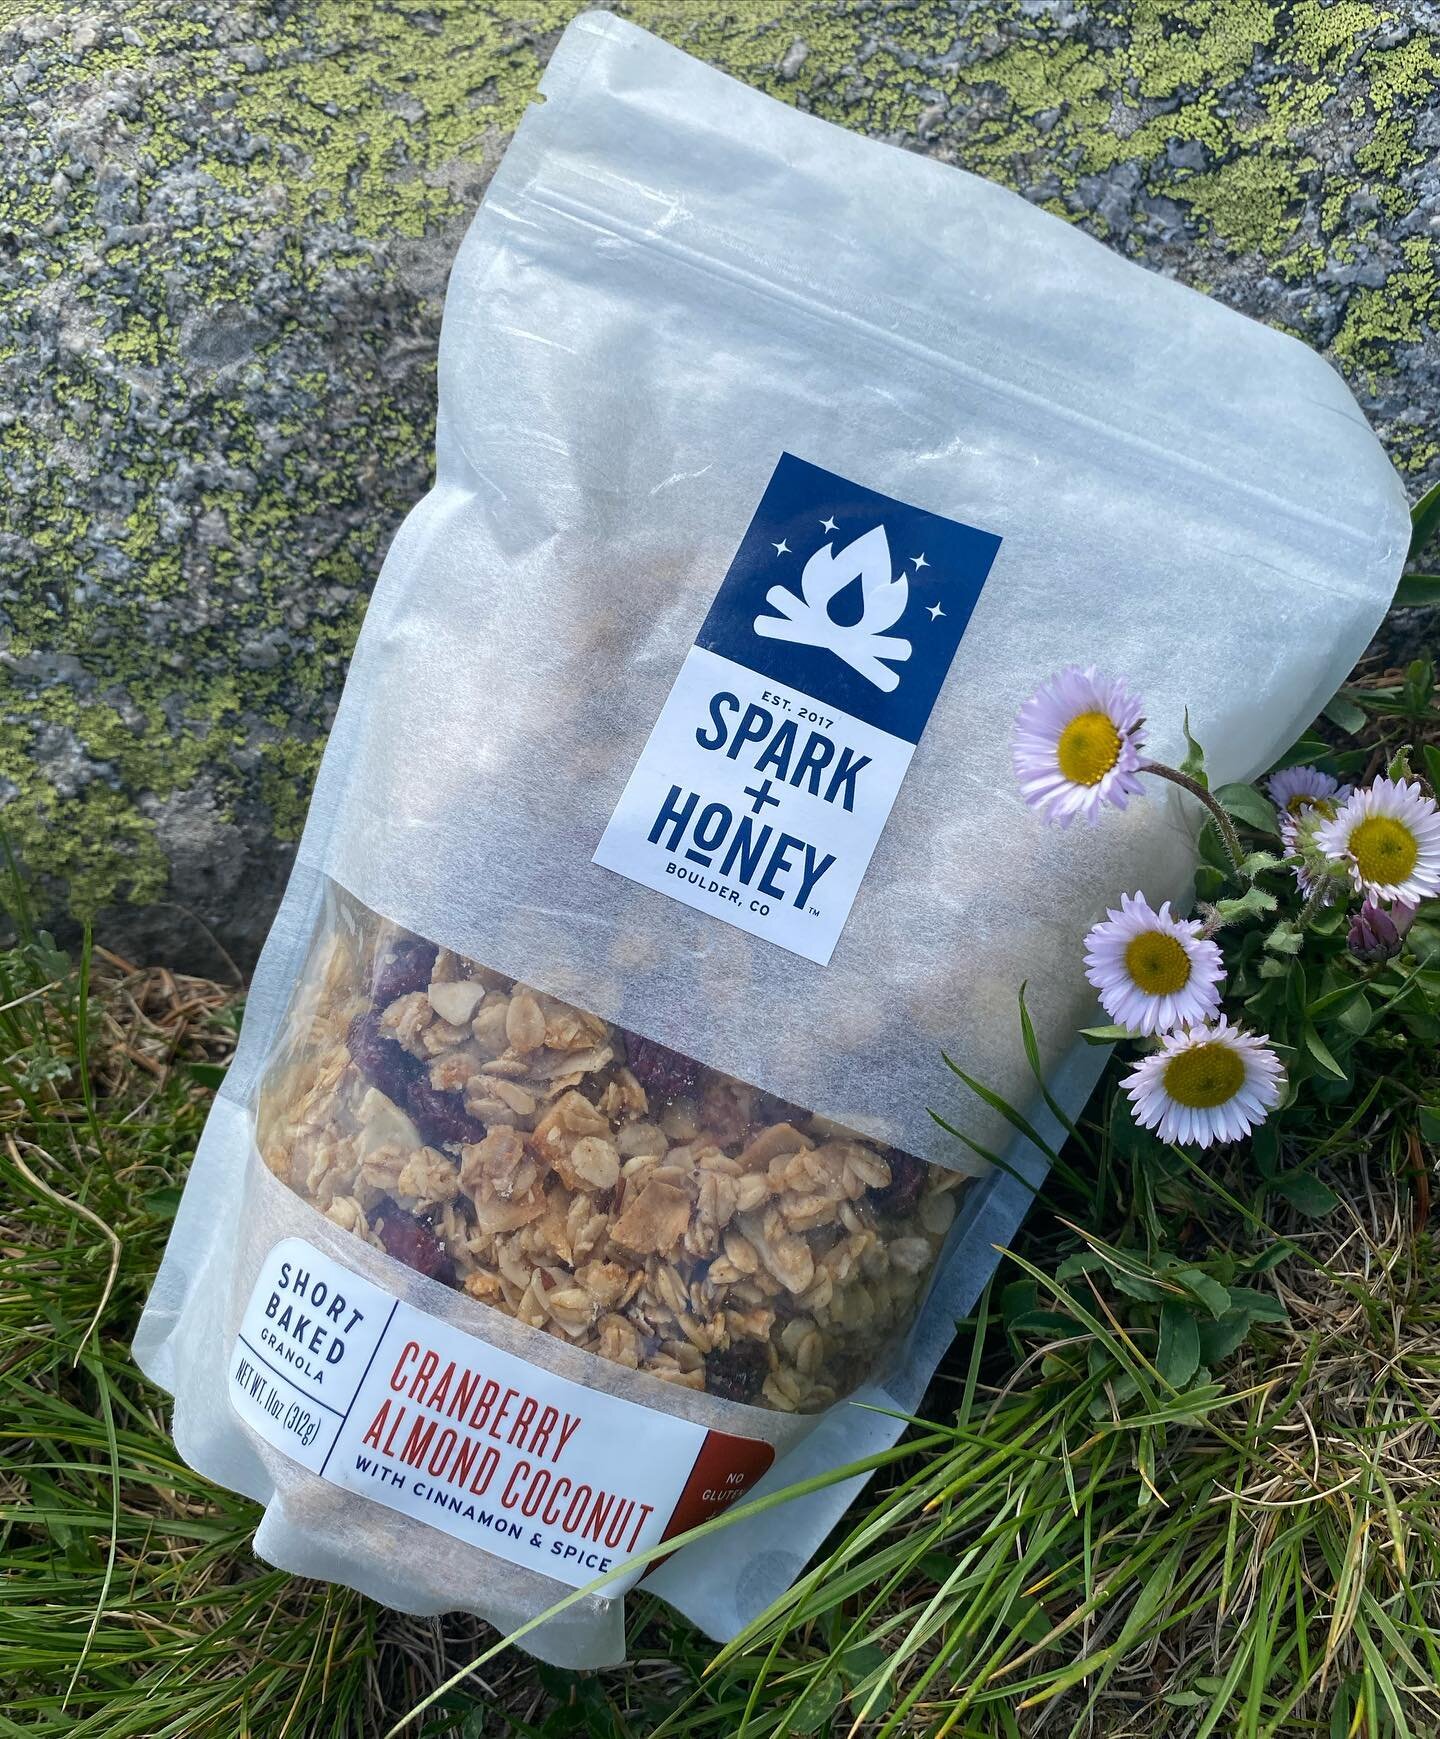 Come stop by the Boulder Farmer&rsquo;s Market today for your next trail snack! 🌸 @bcfm #hikesnack #trailsnack #granolagoodness